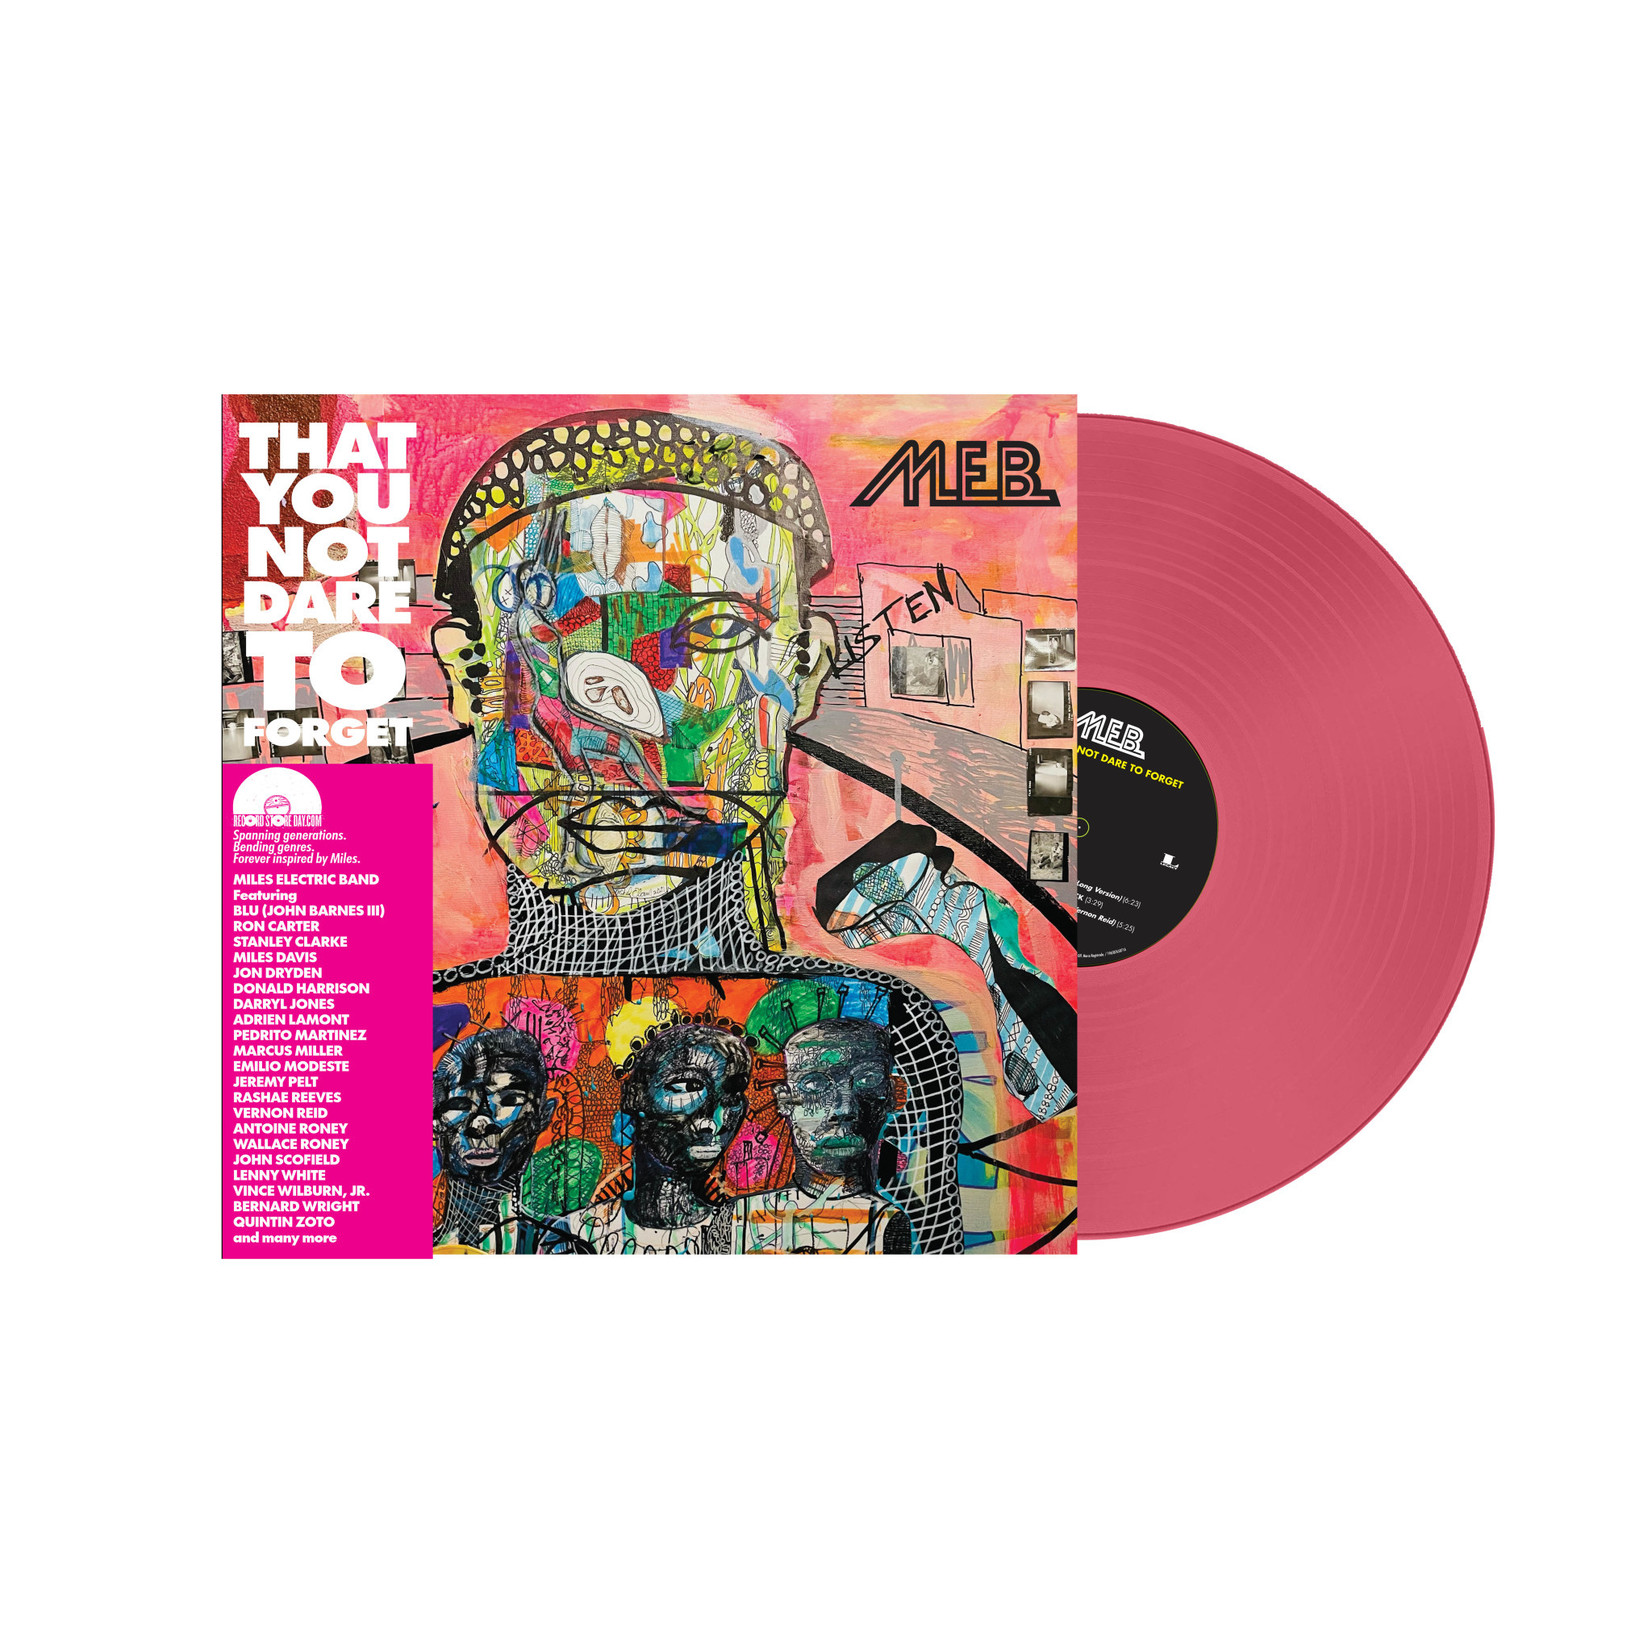 M.E.B. - That You Not Dare To Forget (Pink Vinyl) [LP] (RSD2023)